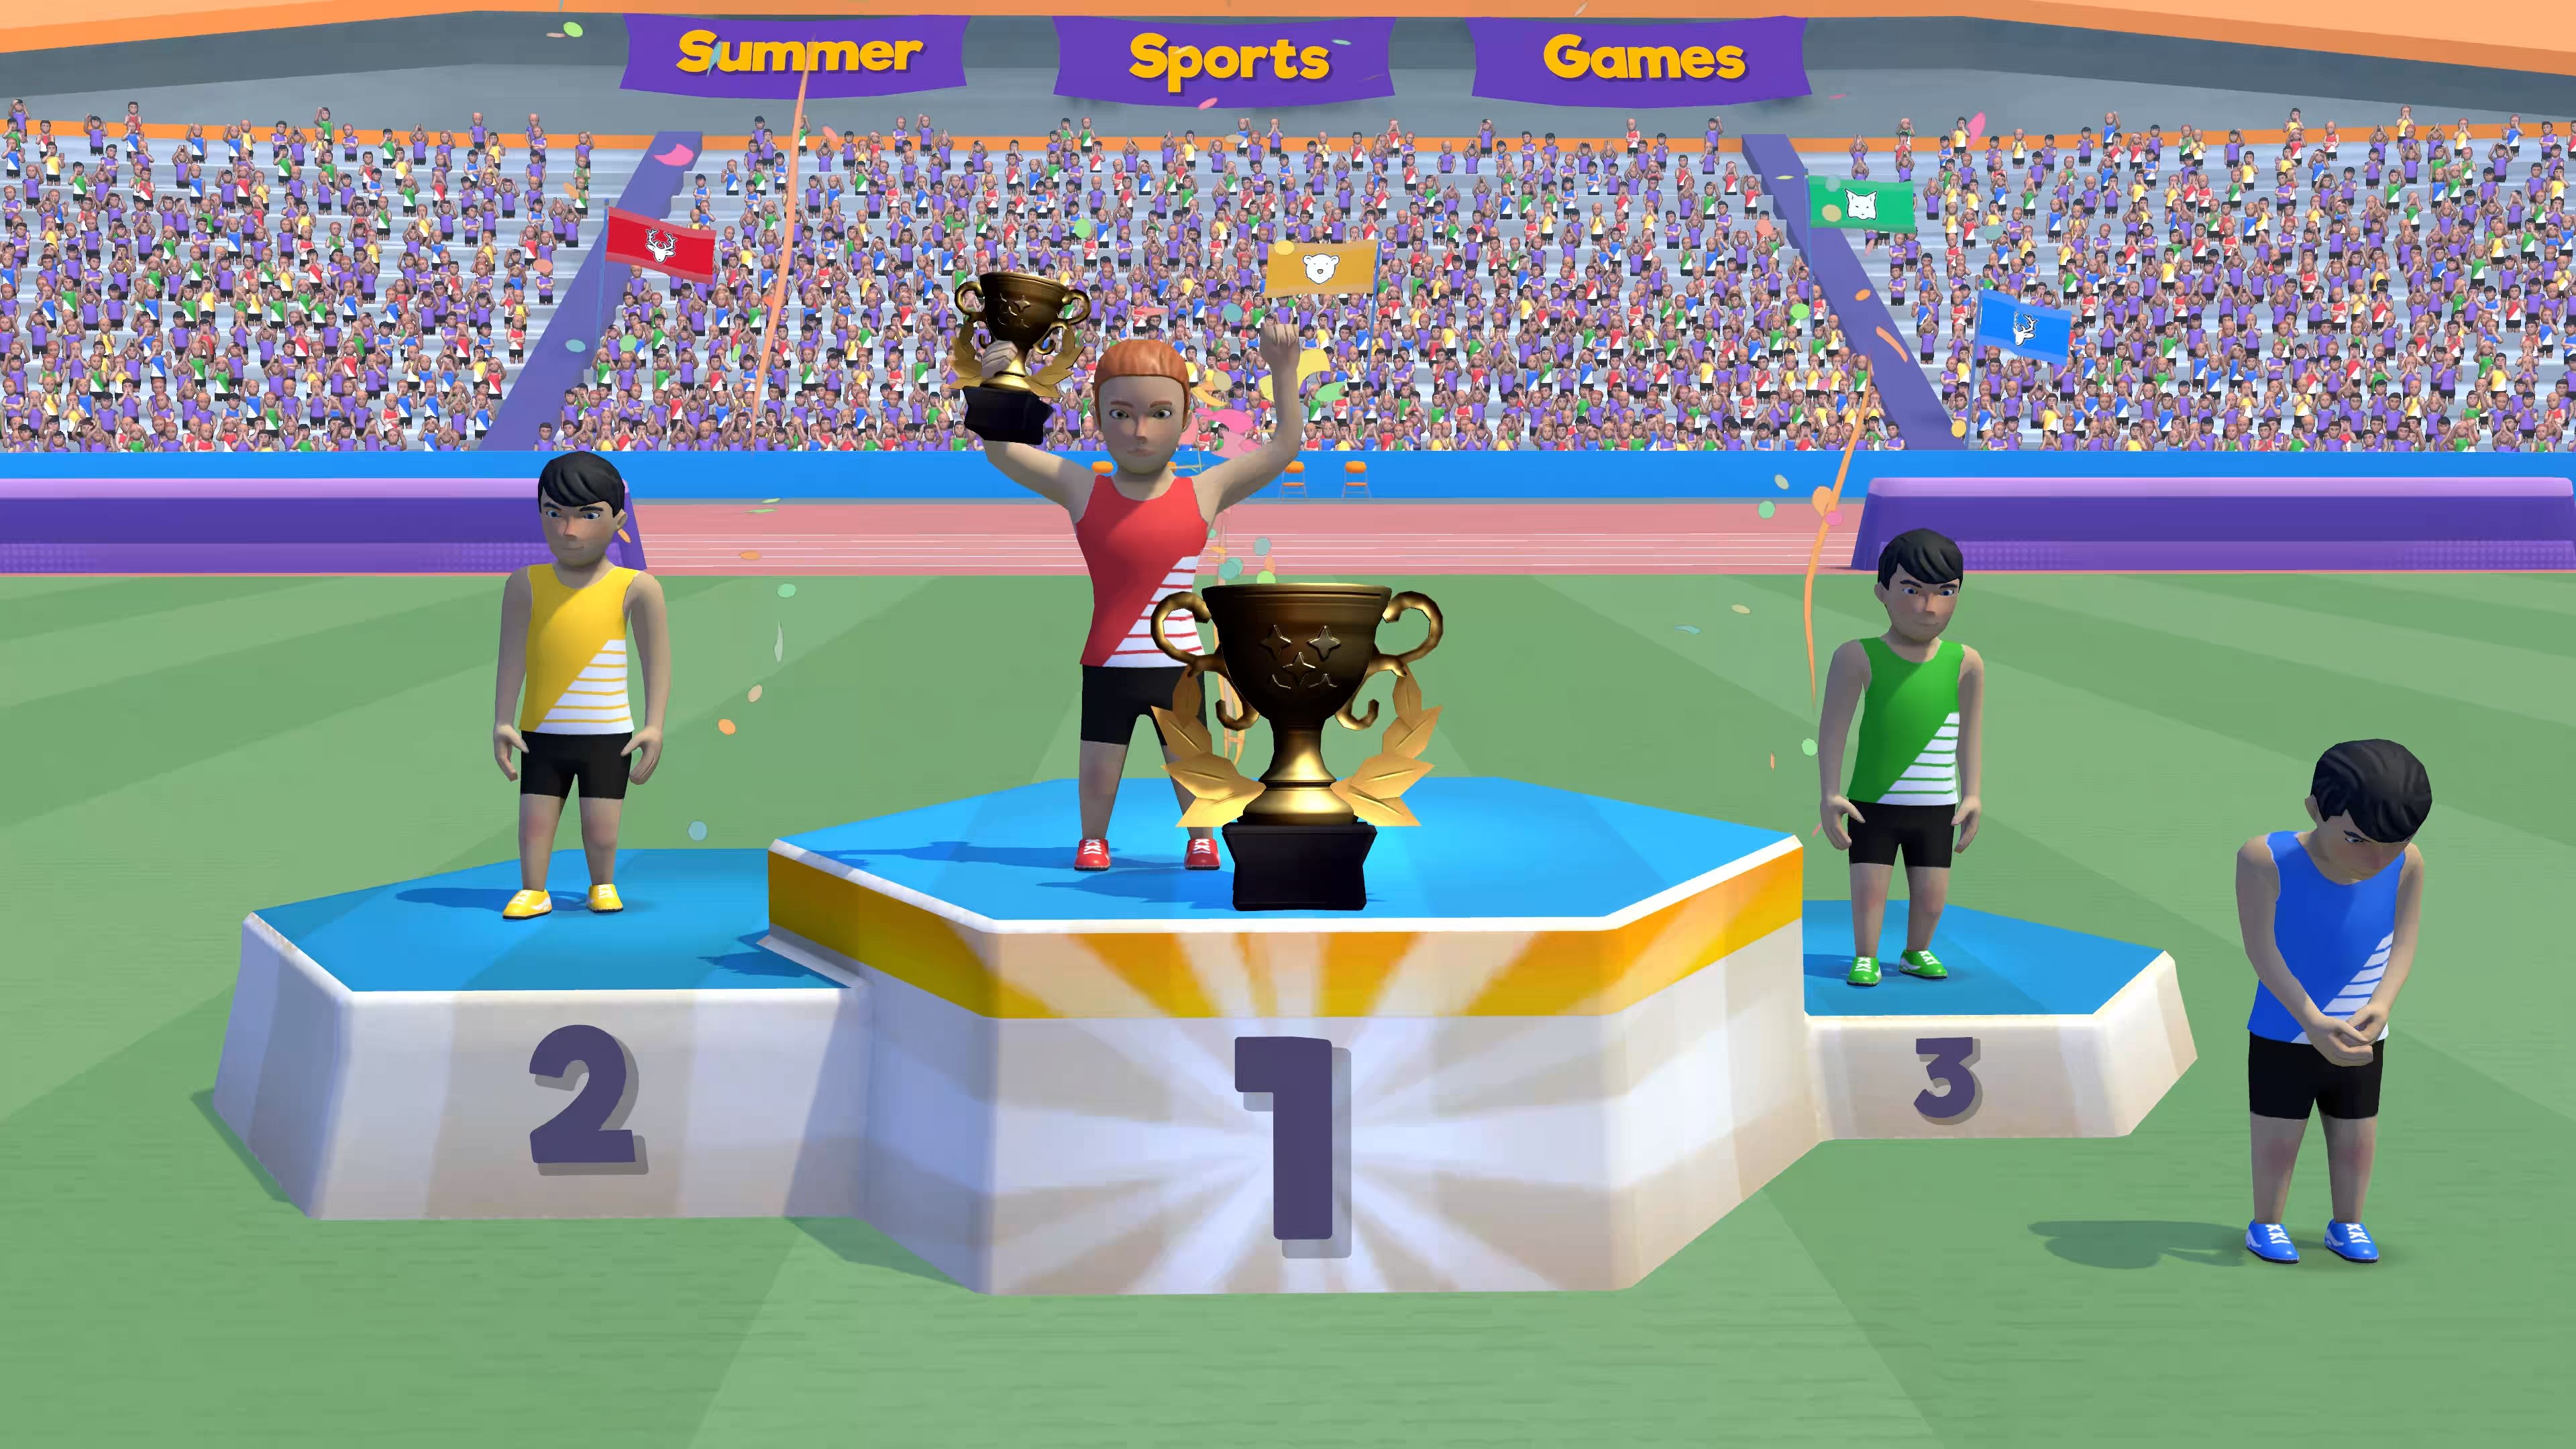 Summer Sports games. Гейм спорт. Wi Sports игра. Sport and games we are